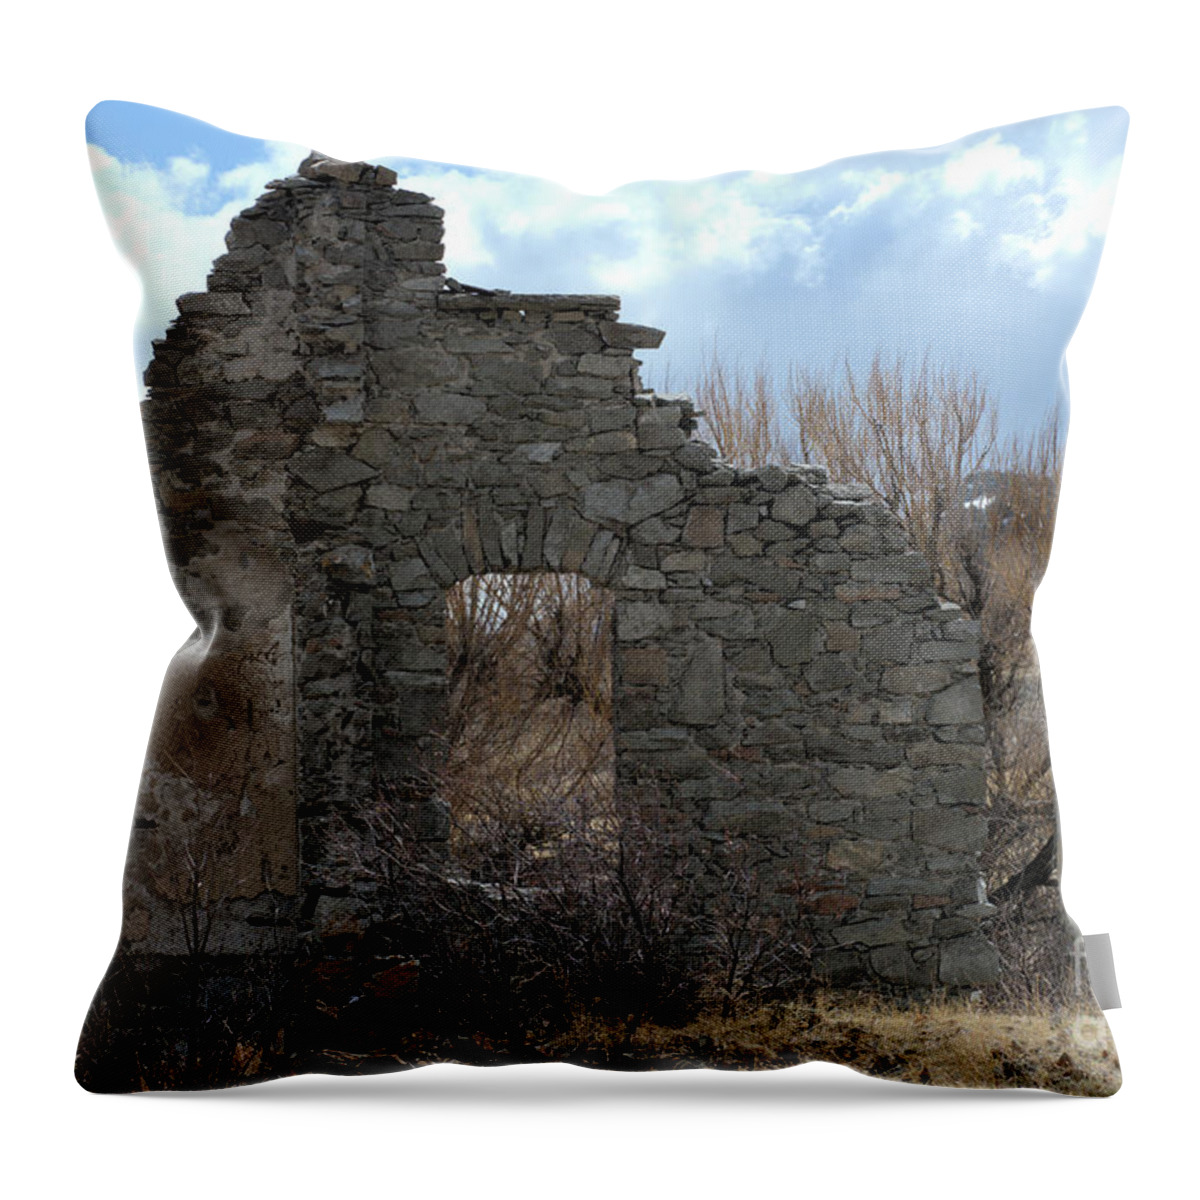 Abandoned Throw Pillow featuring the photograph Not Much Left by Kae Cheatham